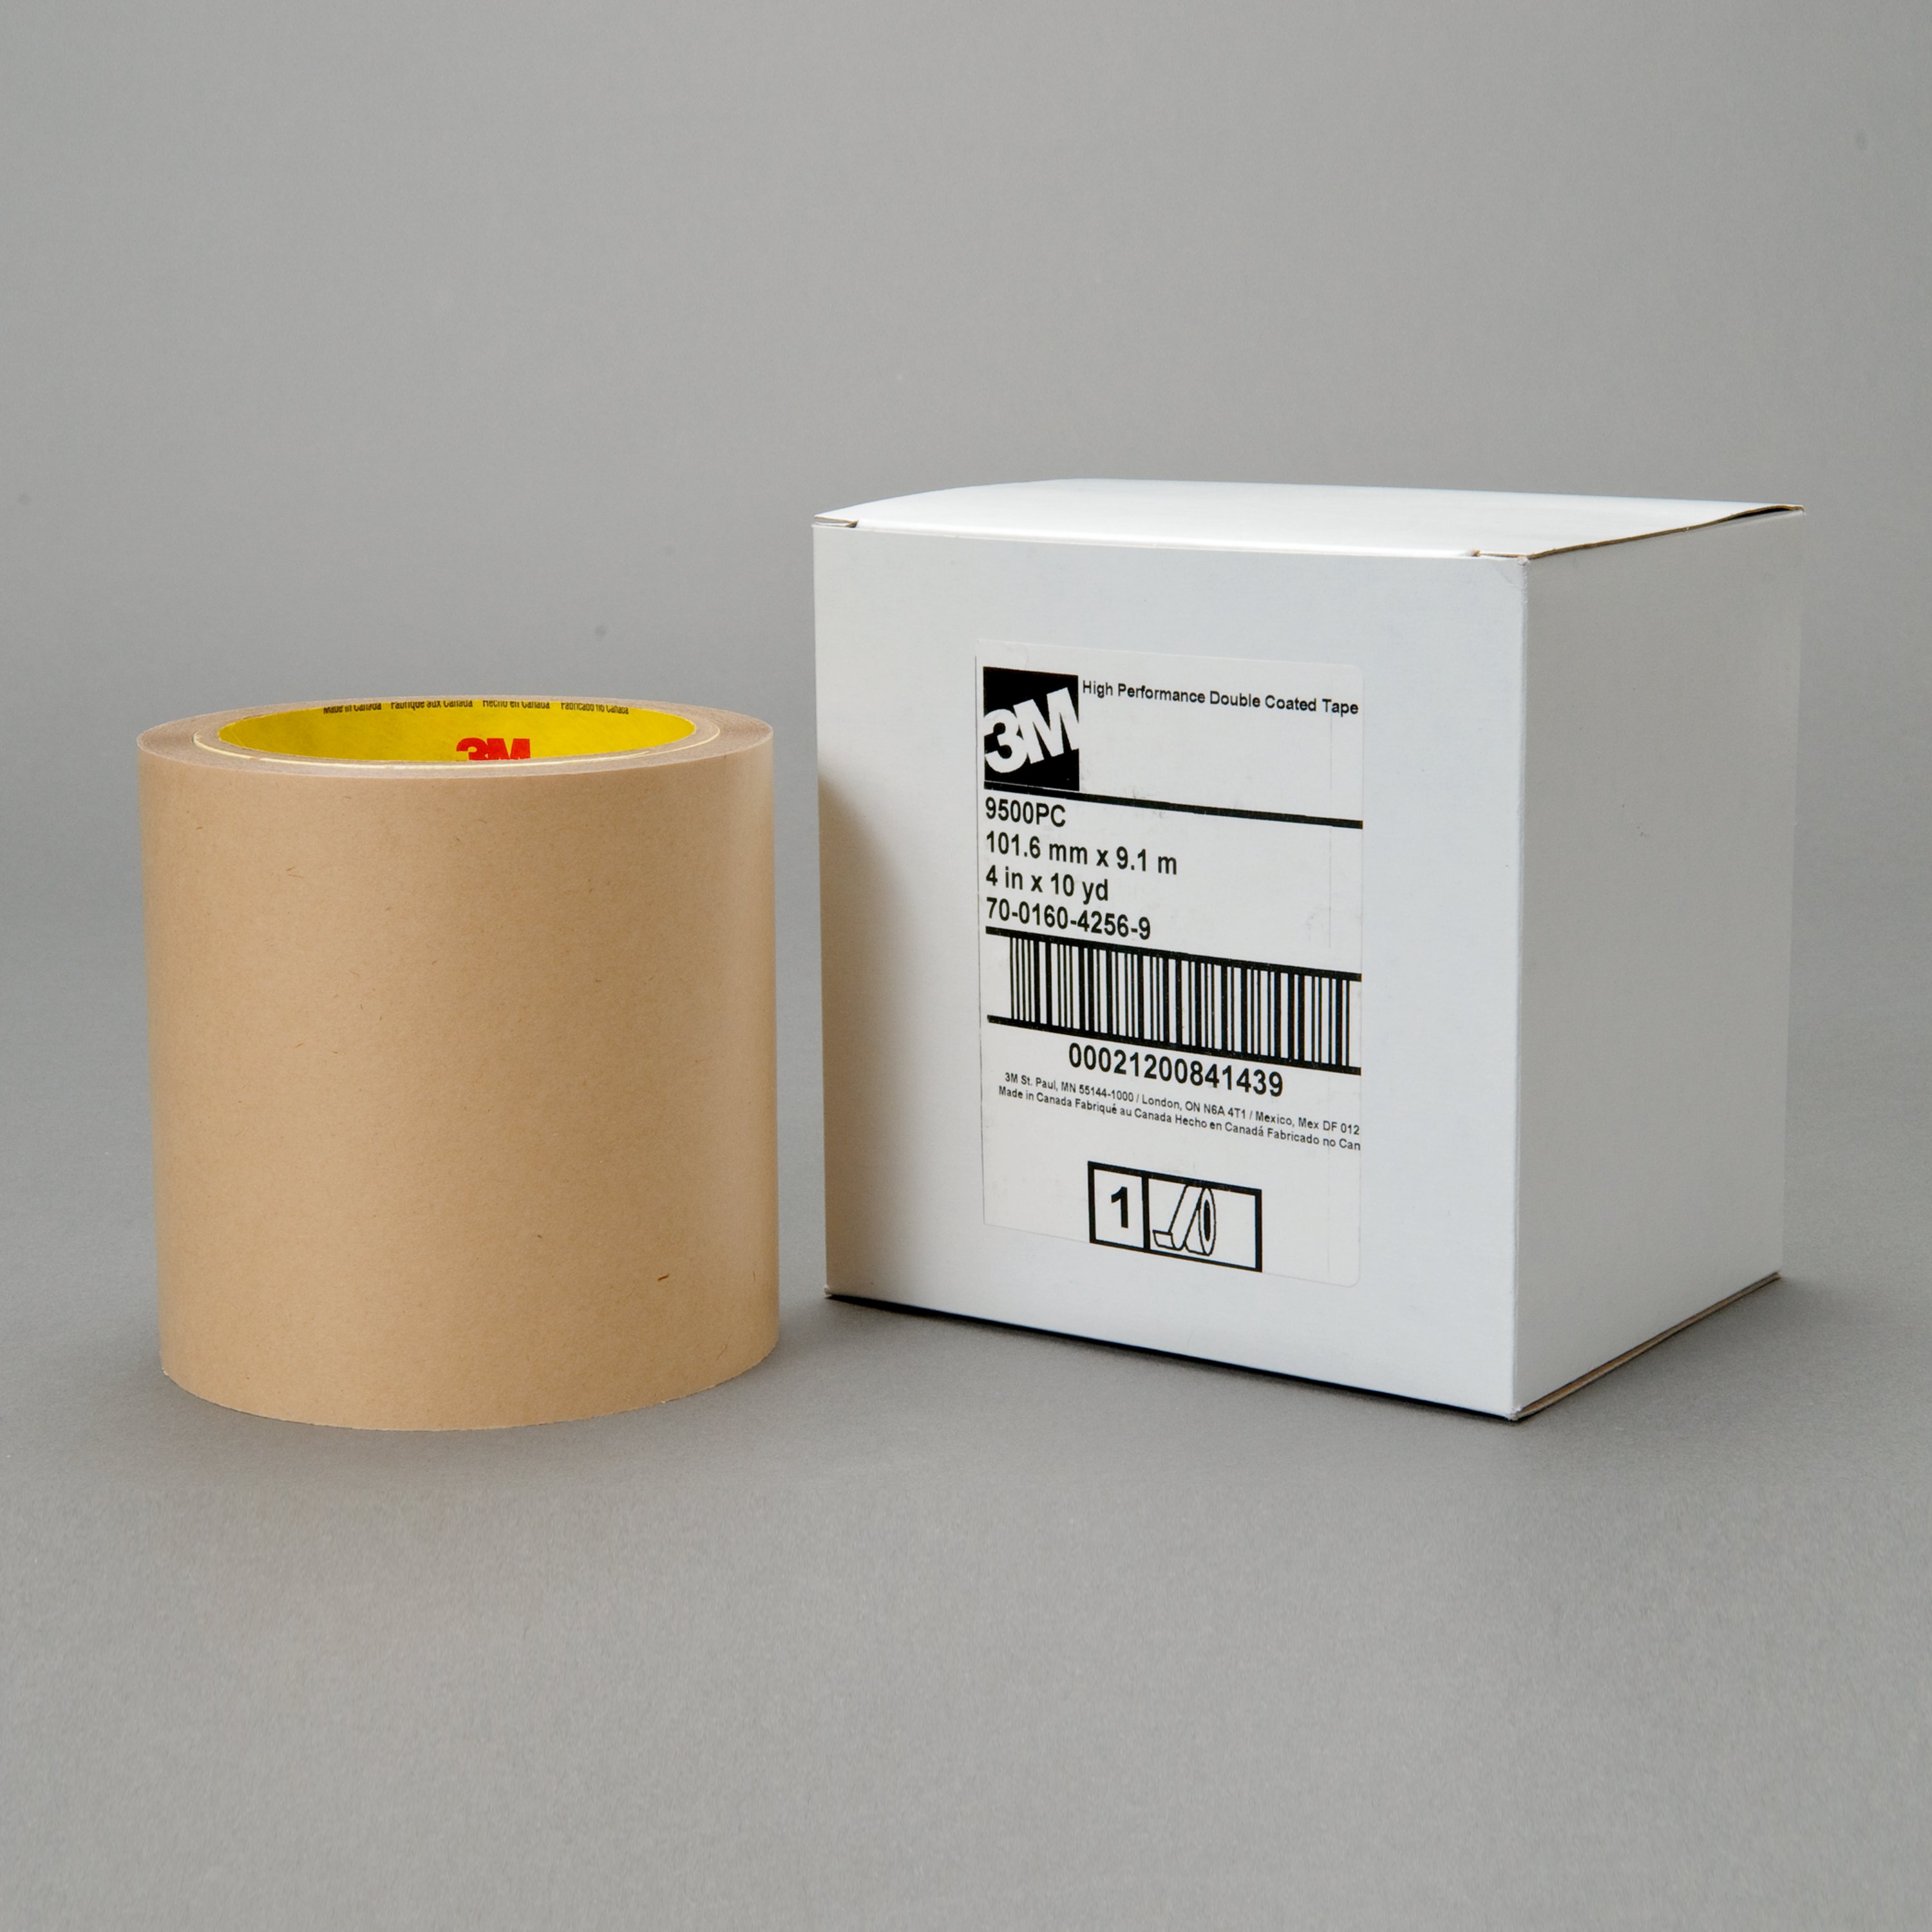 3M™ Double Coated Tape 9500PC